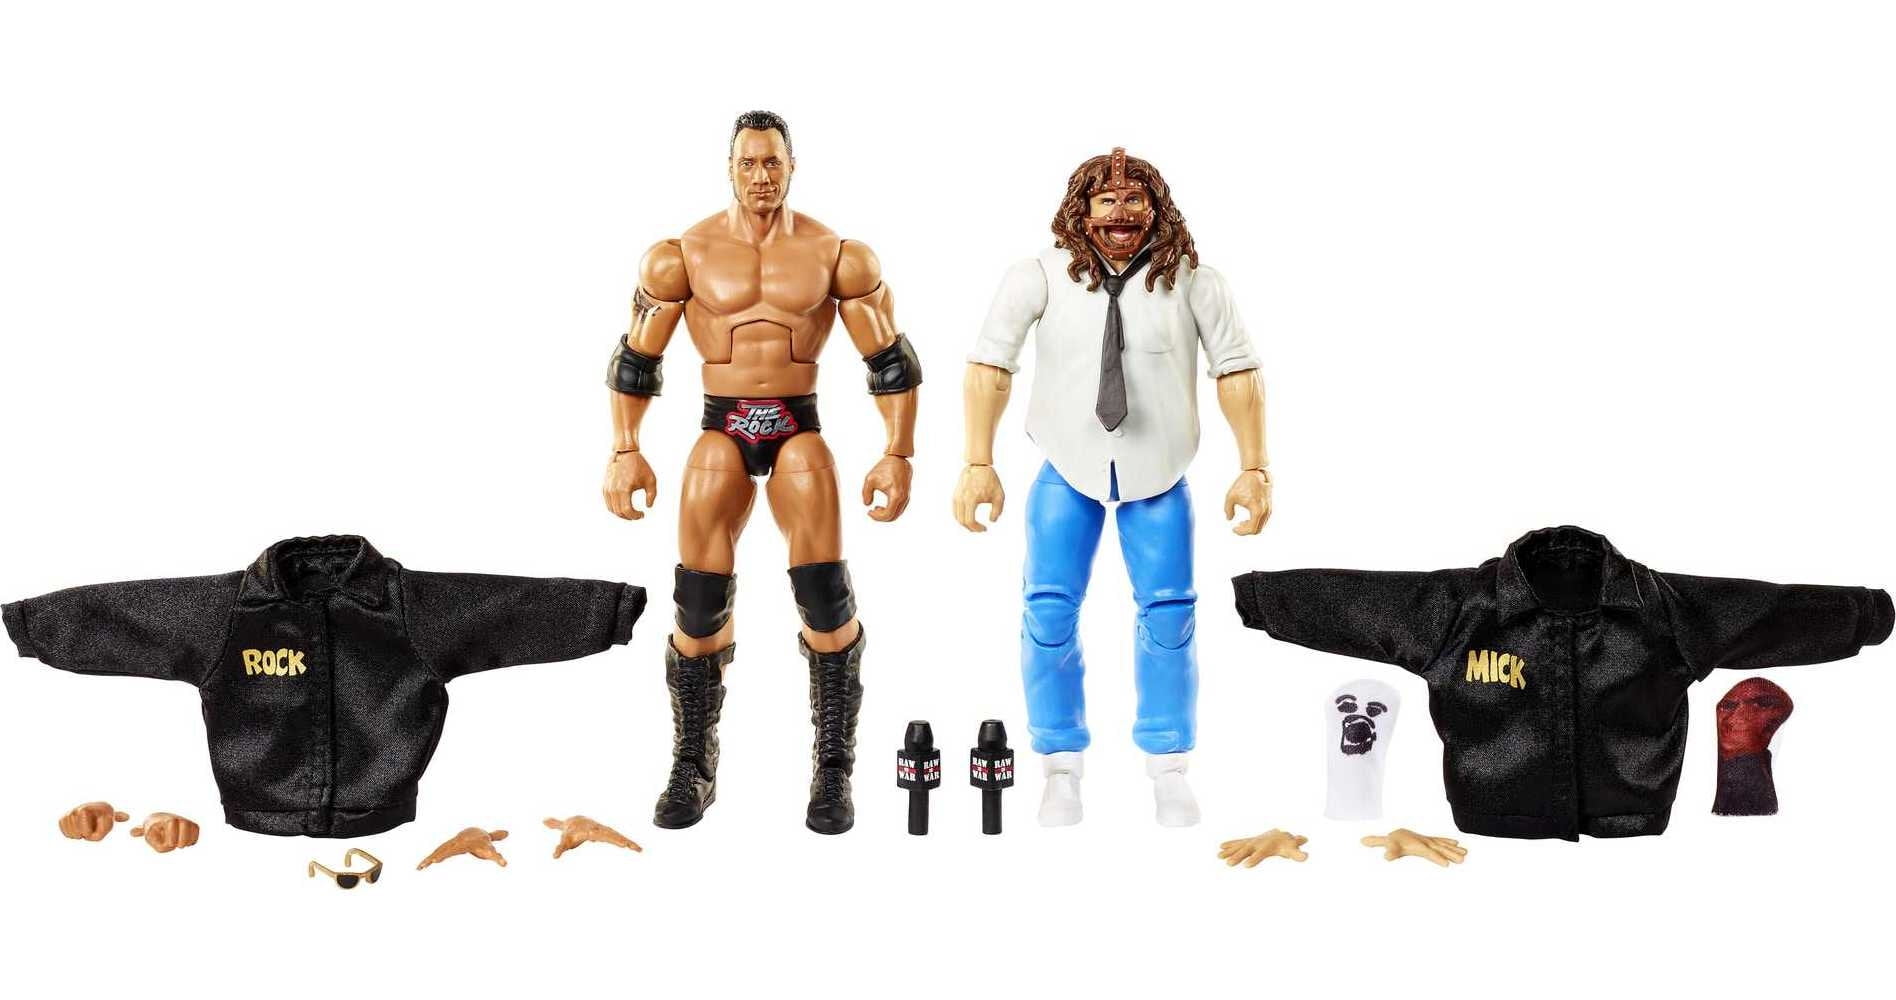 Funko Pop! WWE The Rock and Mankind Walmart Exclusive 2 Pack - US